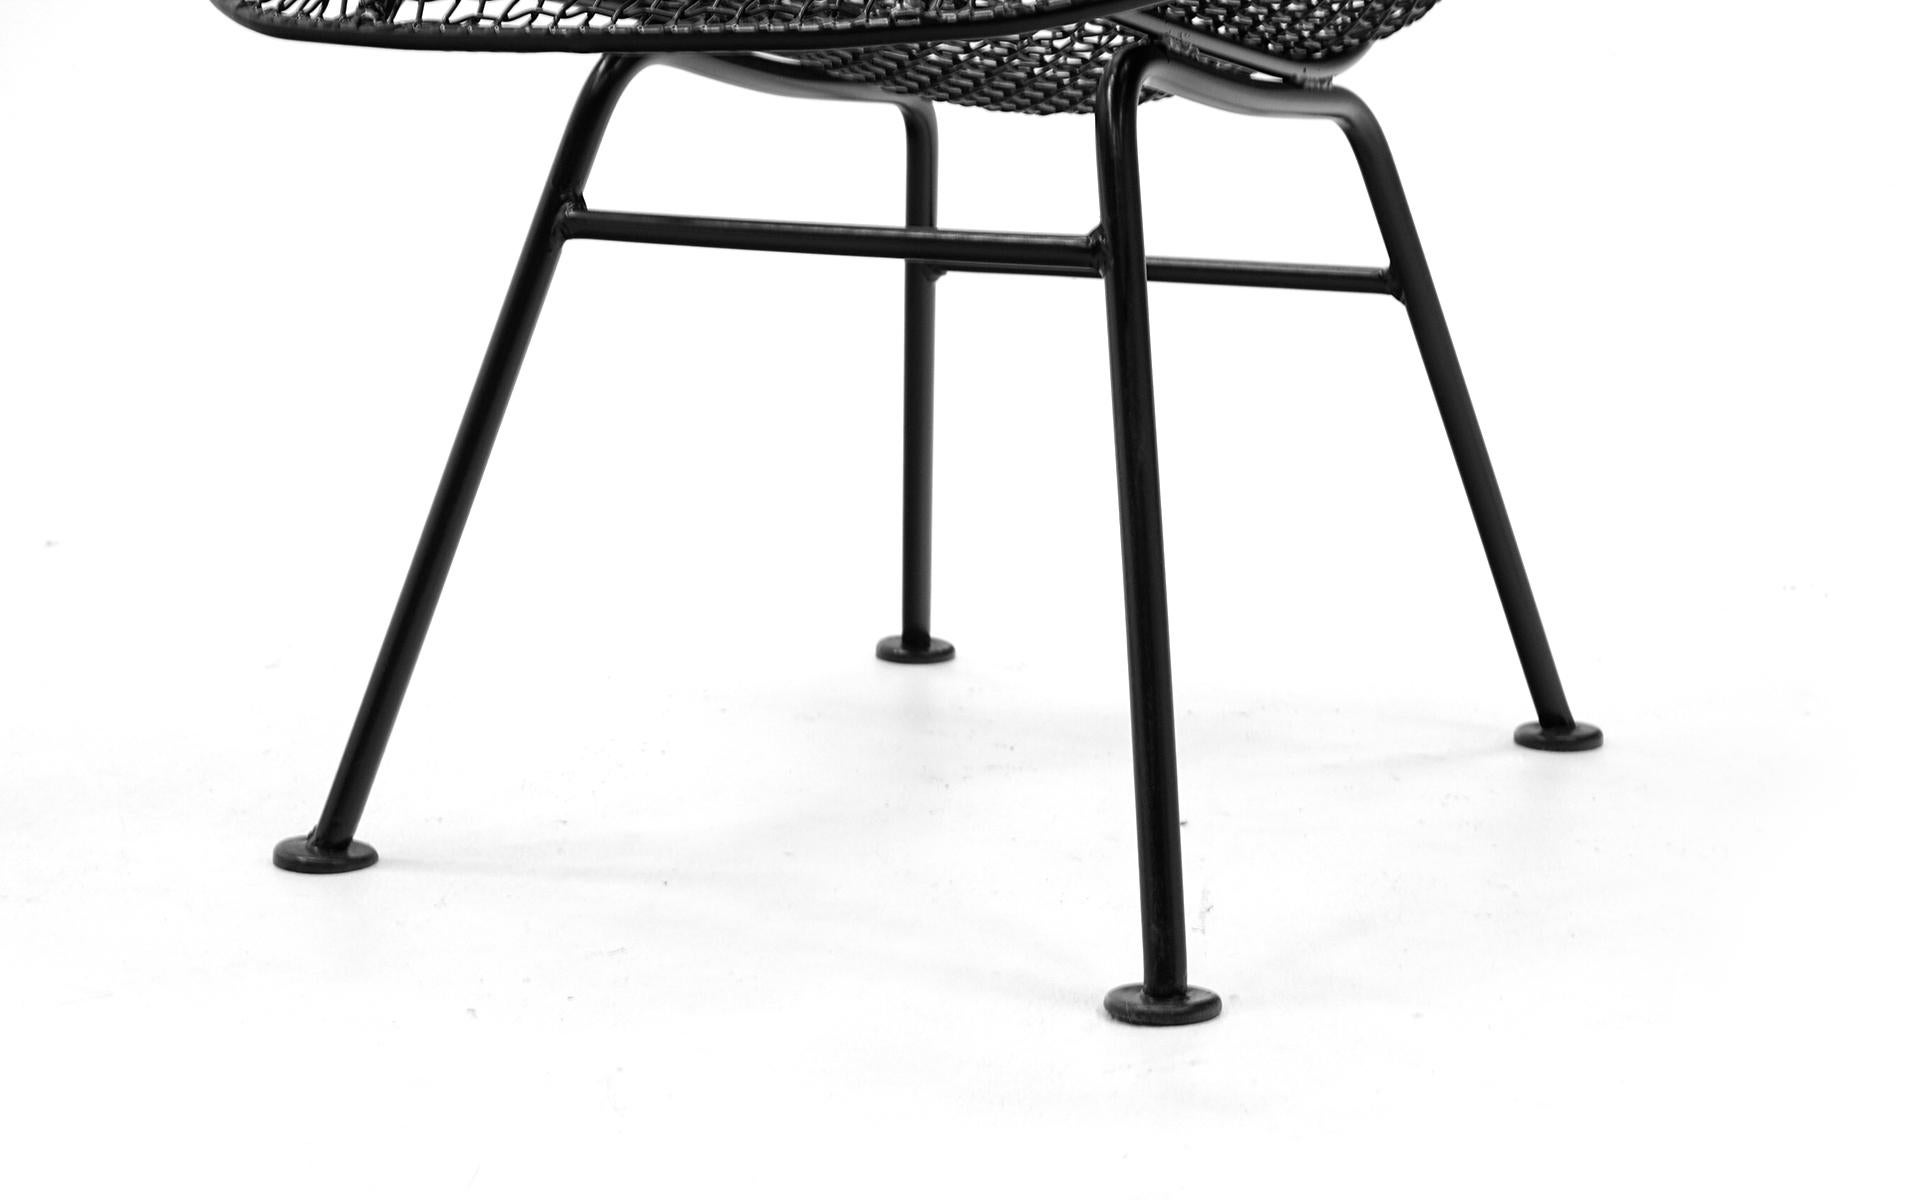 Wrought Iron 4 Sculptura Lounge Chairs with Arms by John Woodard Black Woven Wire Restored